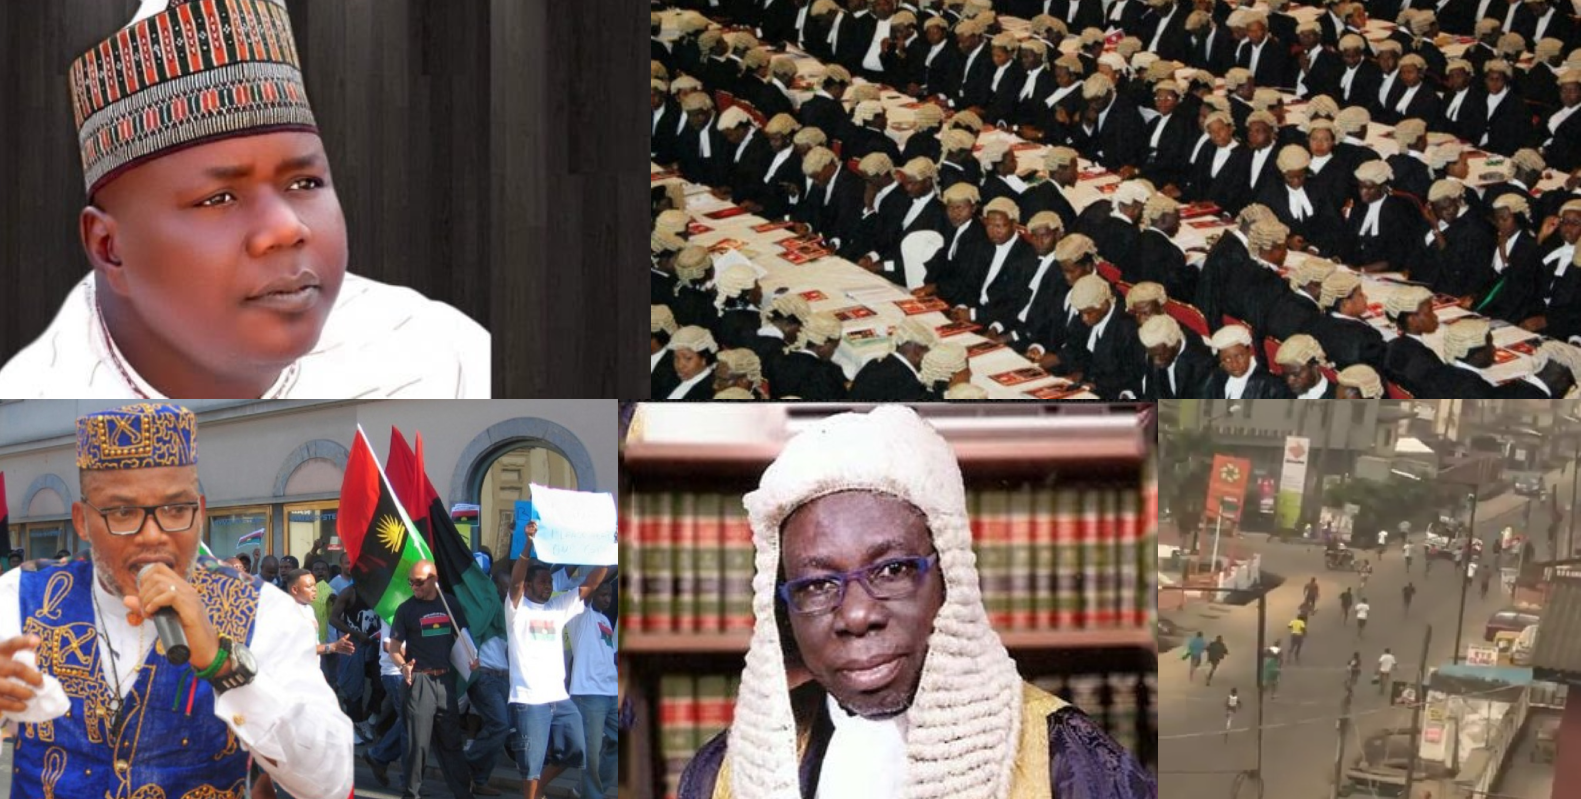 Nigerian News Headlines: 6 stories you must not miss this evening, Sunday, January 24, 2021